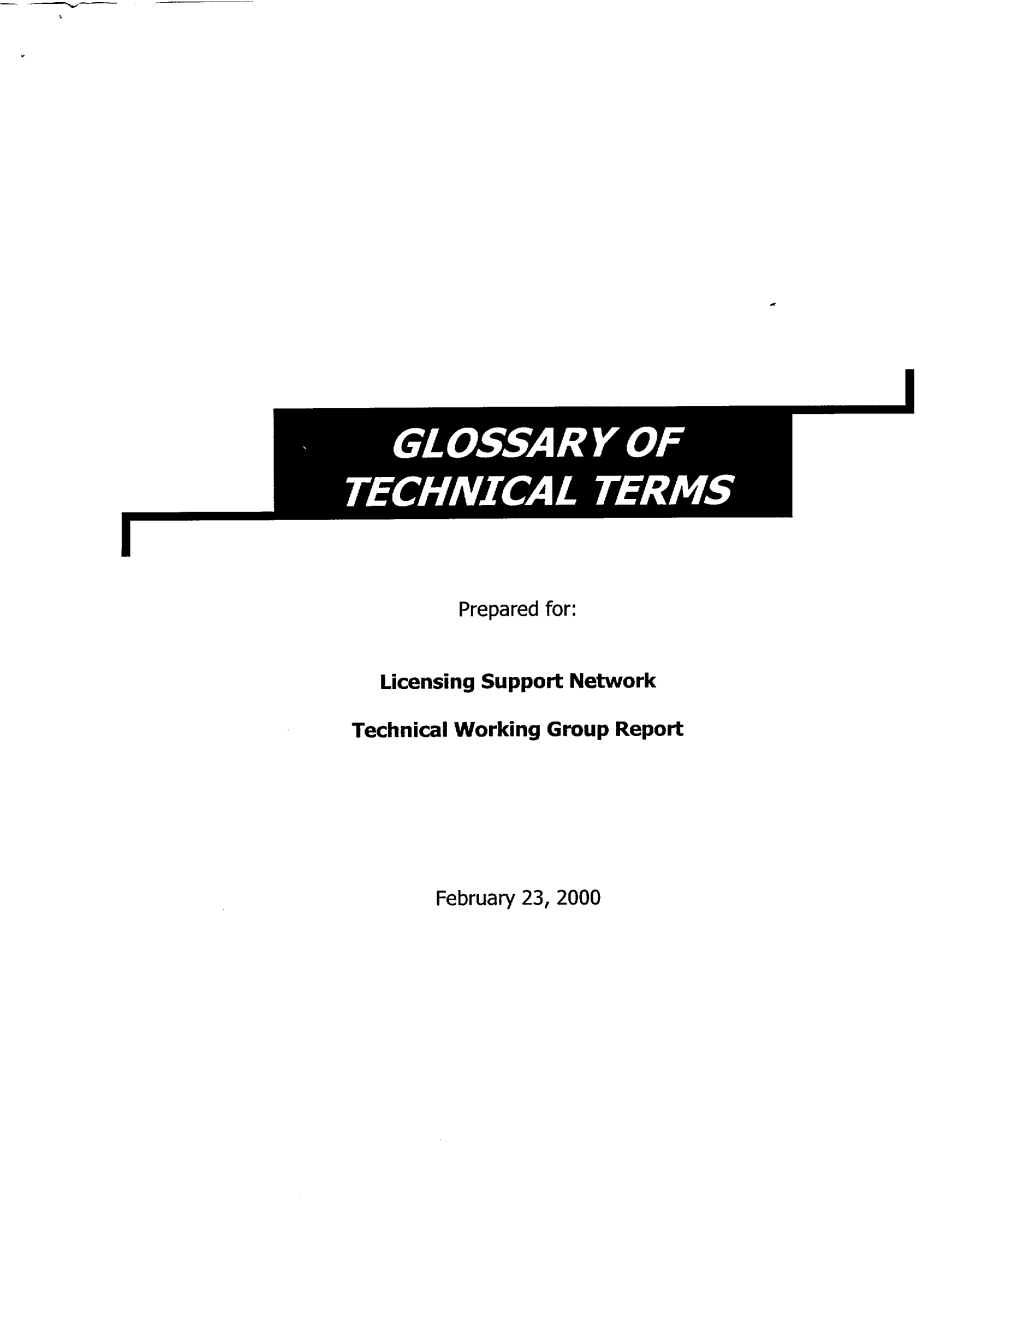 "Glossary of Technical Terms."